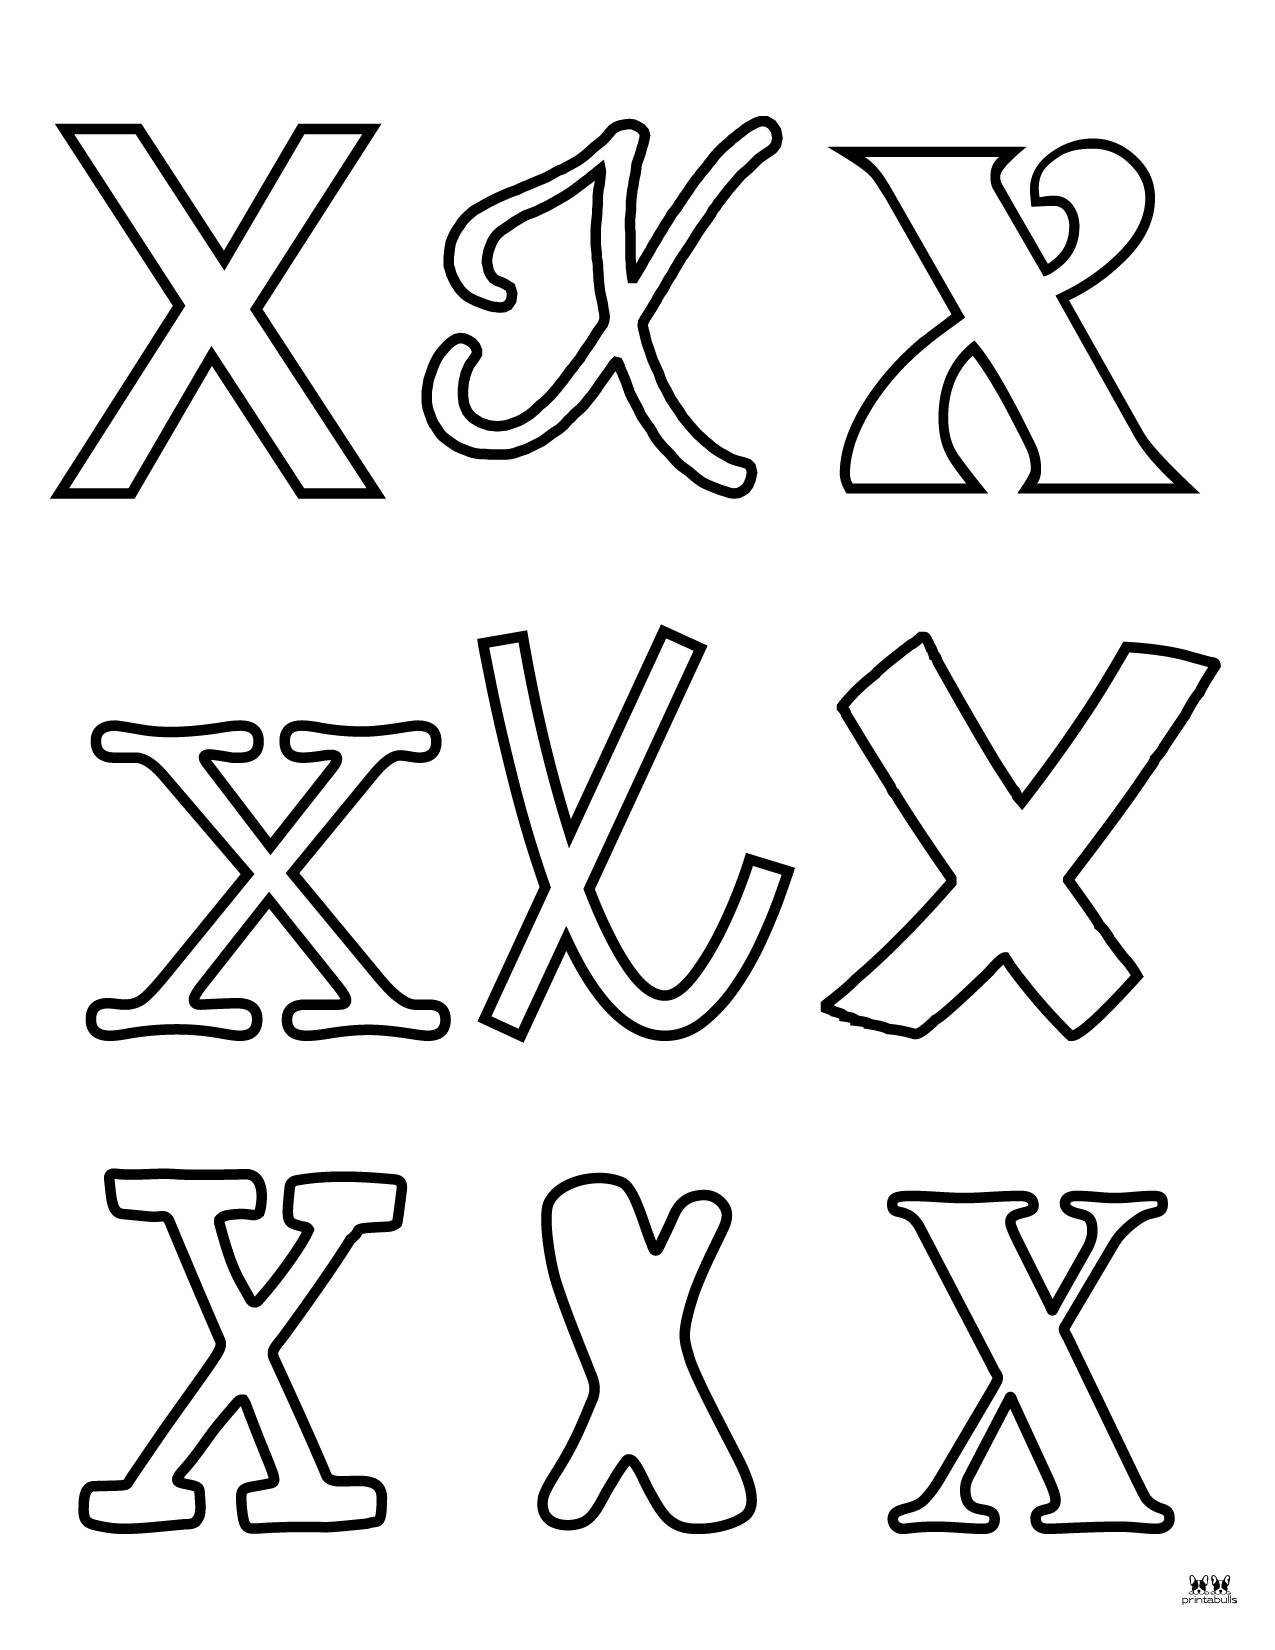 trace-lowercase-letter-x-worksheet-for-free